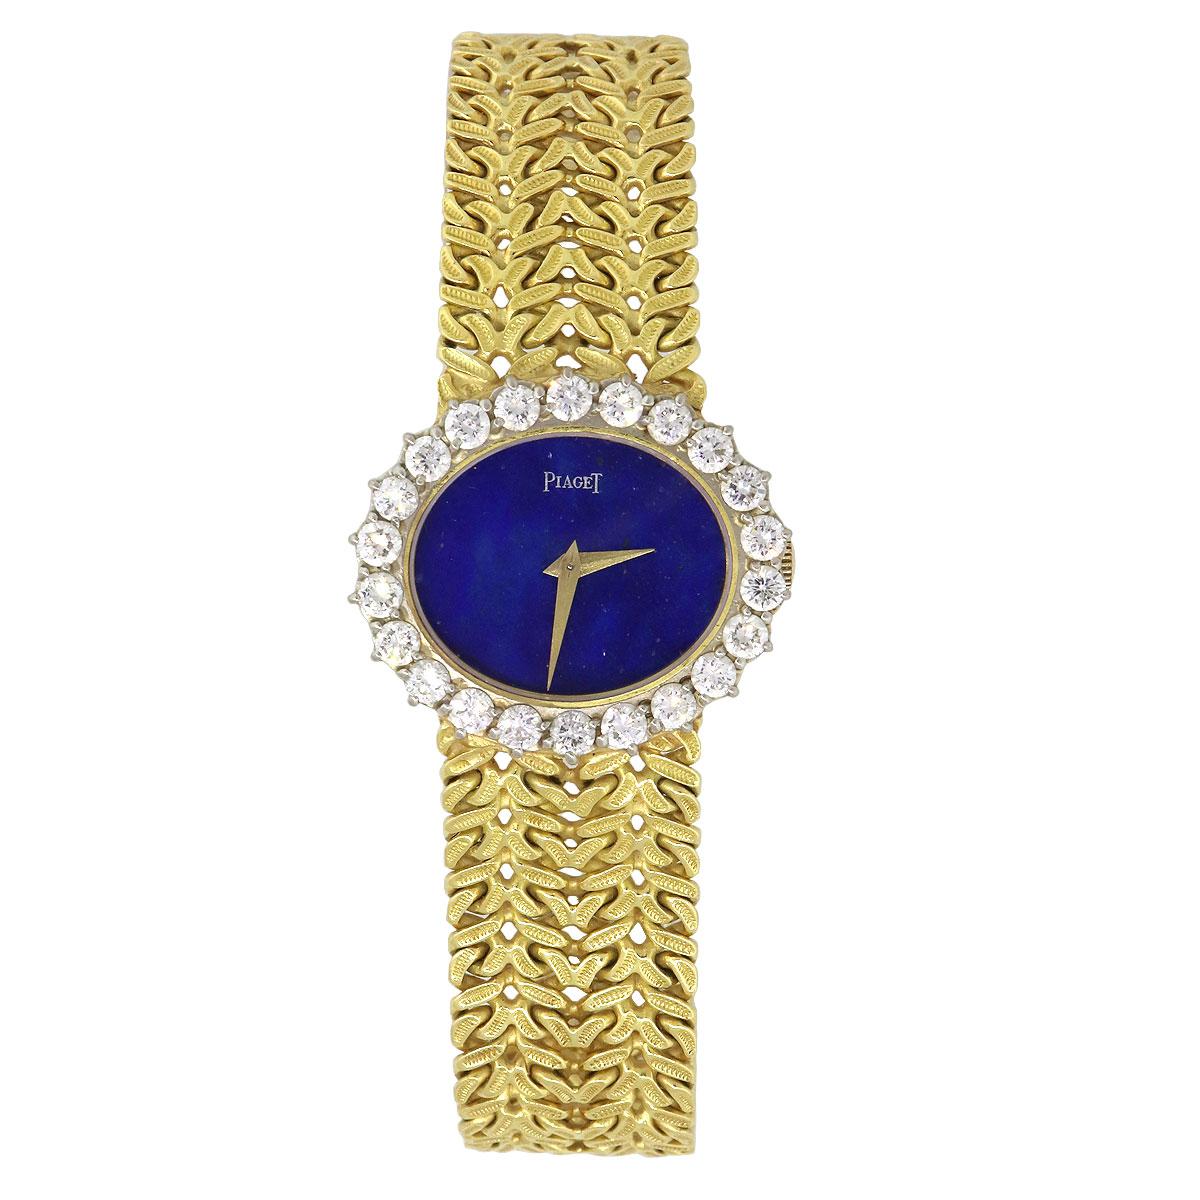 Brand: Piaget
Case Material: 18k yellow gold
Case Diameter: 26mm
Crystal: Sapphire crystal (scratch resistant)
Bezel: 18k yellow gold with diamonds
Dial: Blue lapis oval dial
Bracelet: 18k yellow gold bracelet
Size: Will fit a 5.50